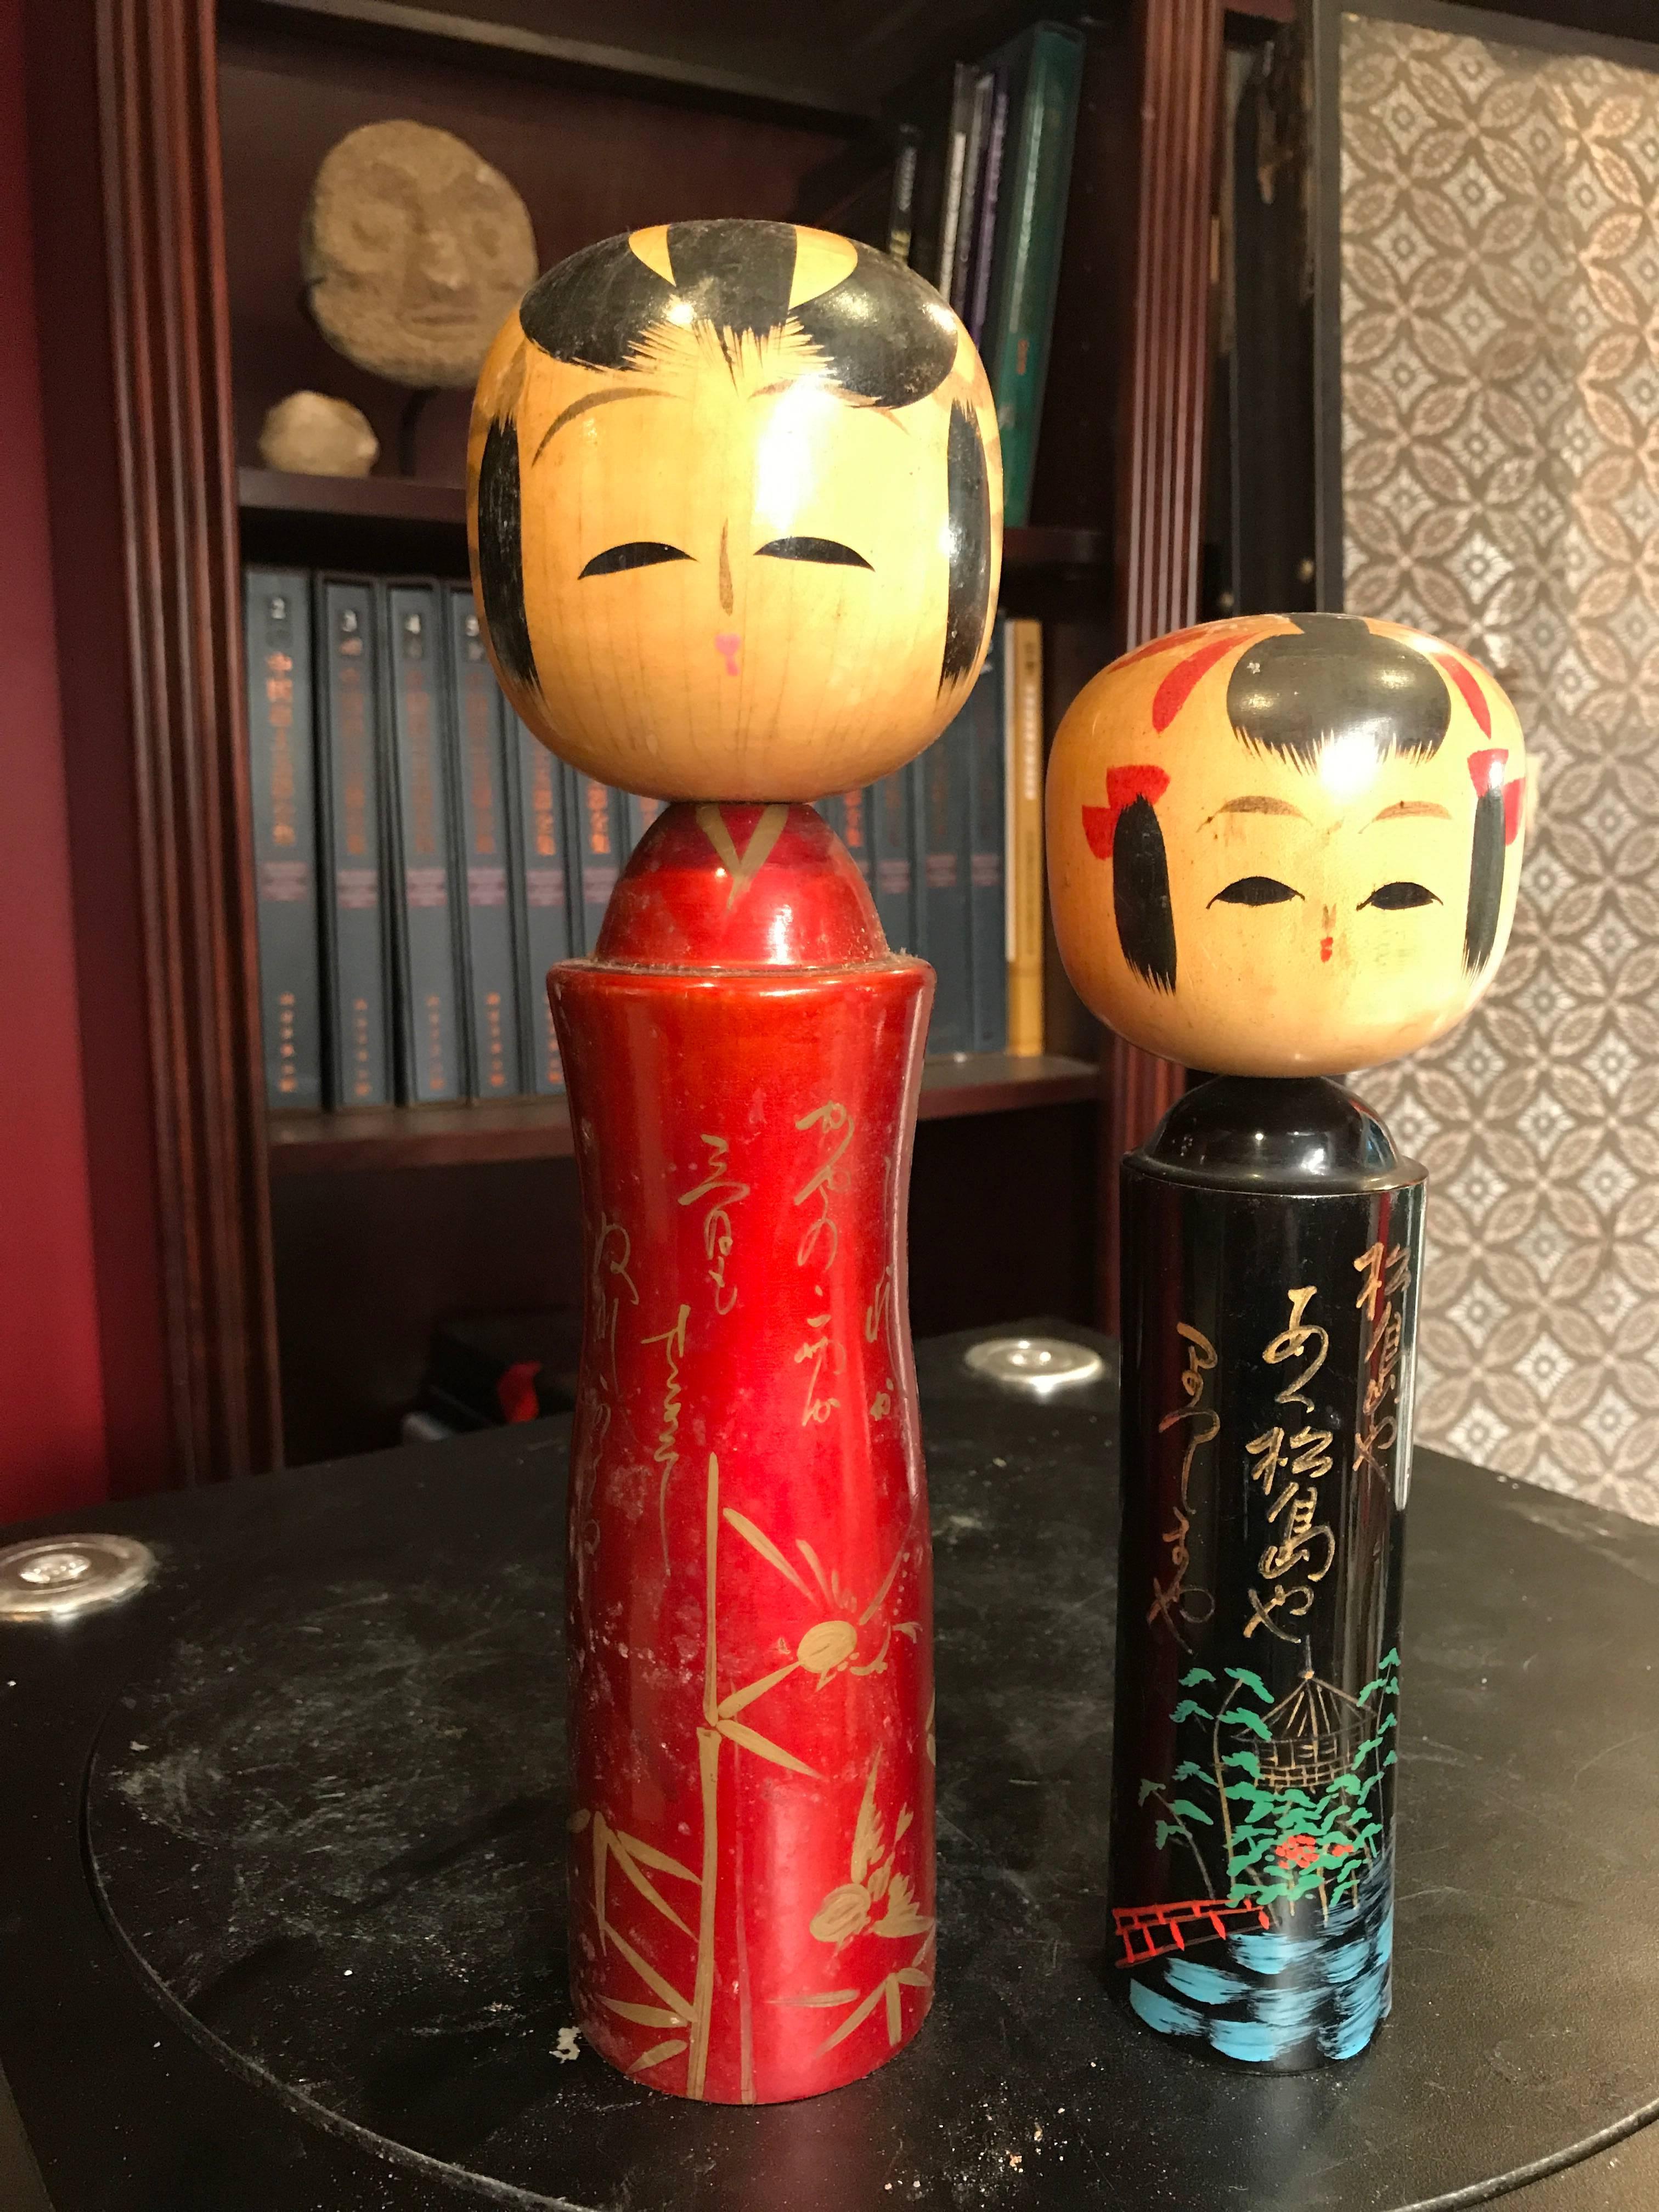 Showa Japanese Pair of Unusual Artisan Signed Dolls, Rare Red and Black Lacquer